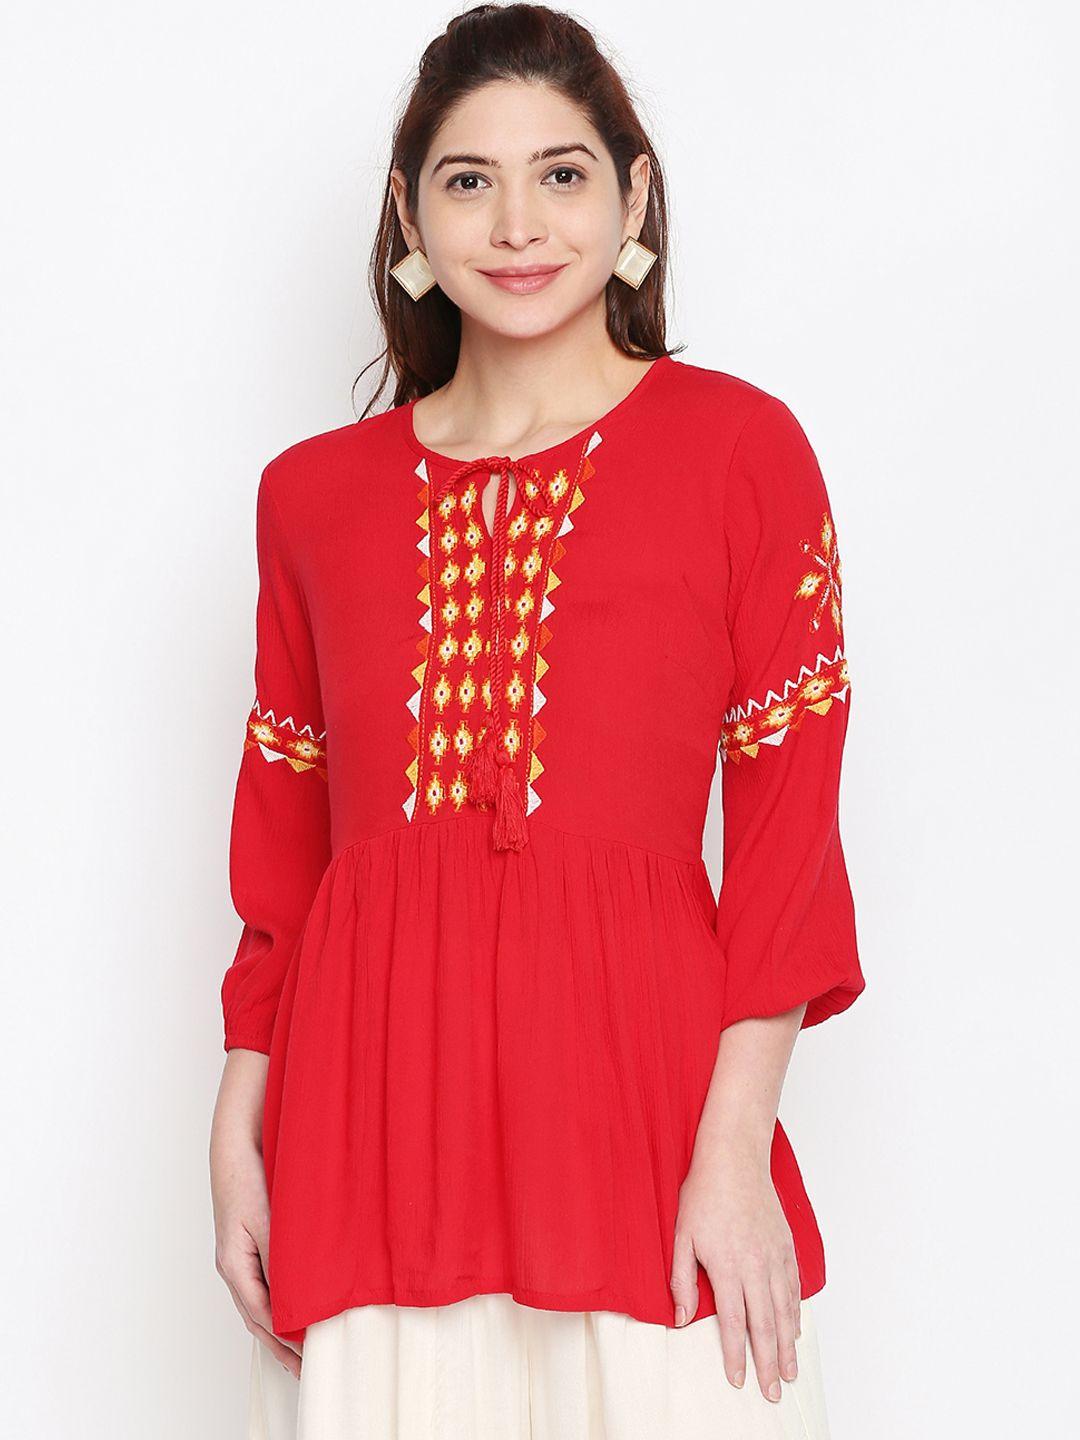 akkriti by pantaloons women red solid top